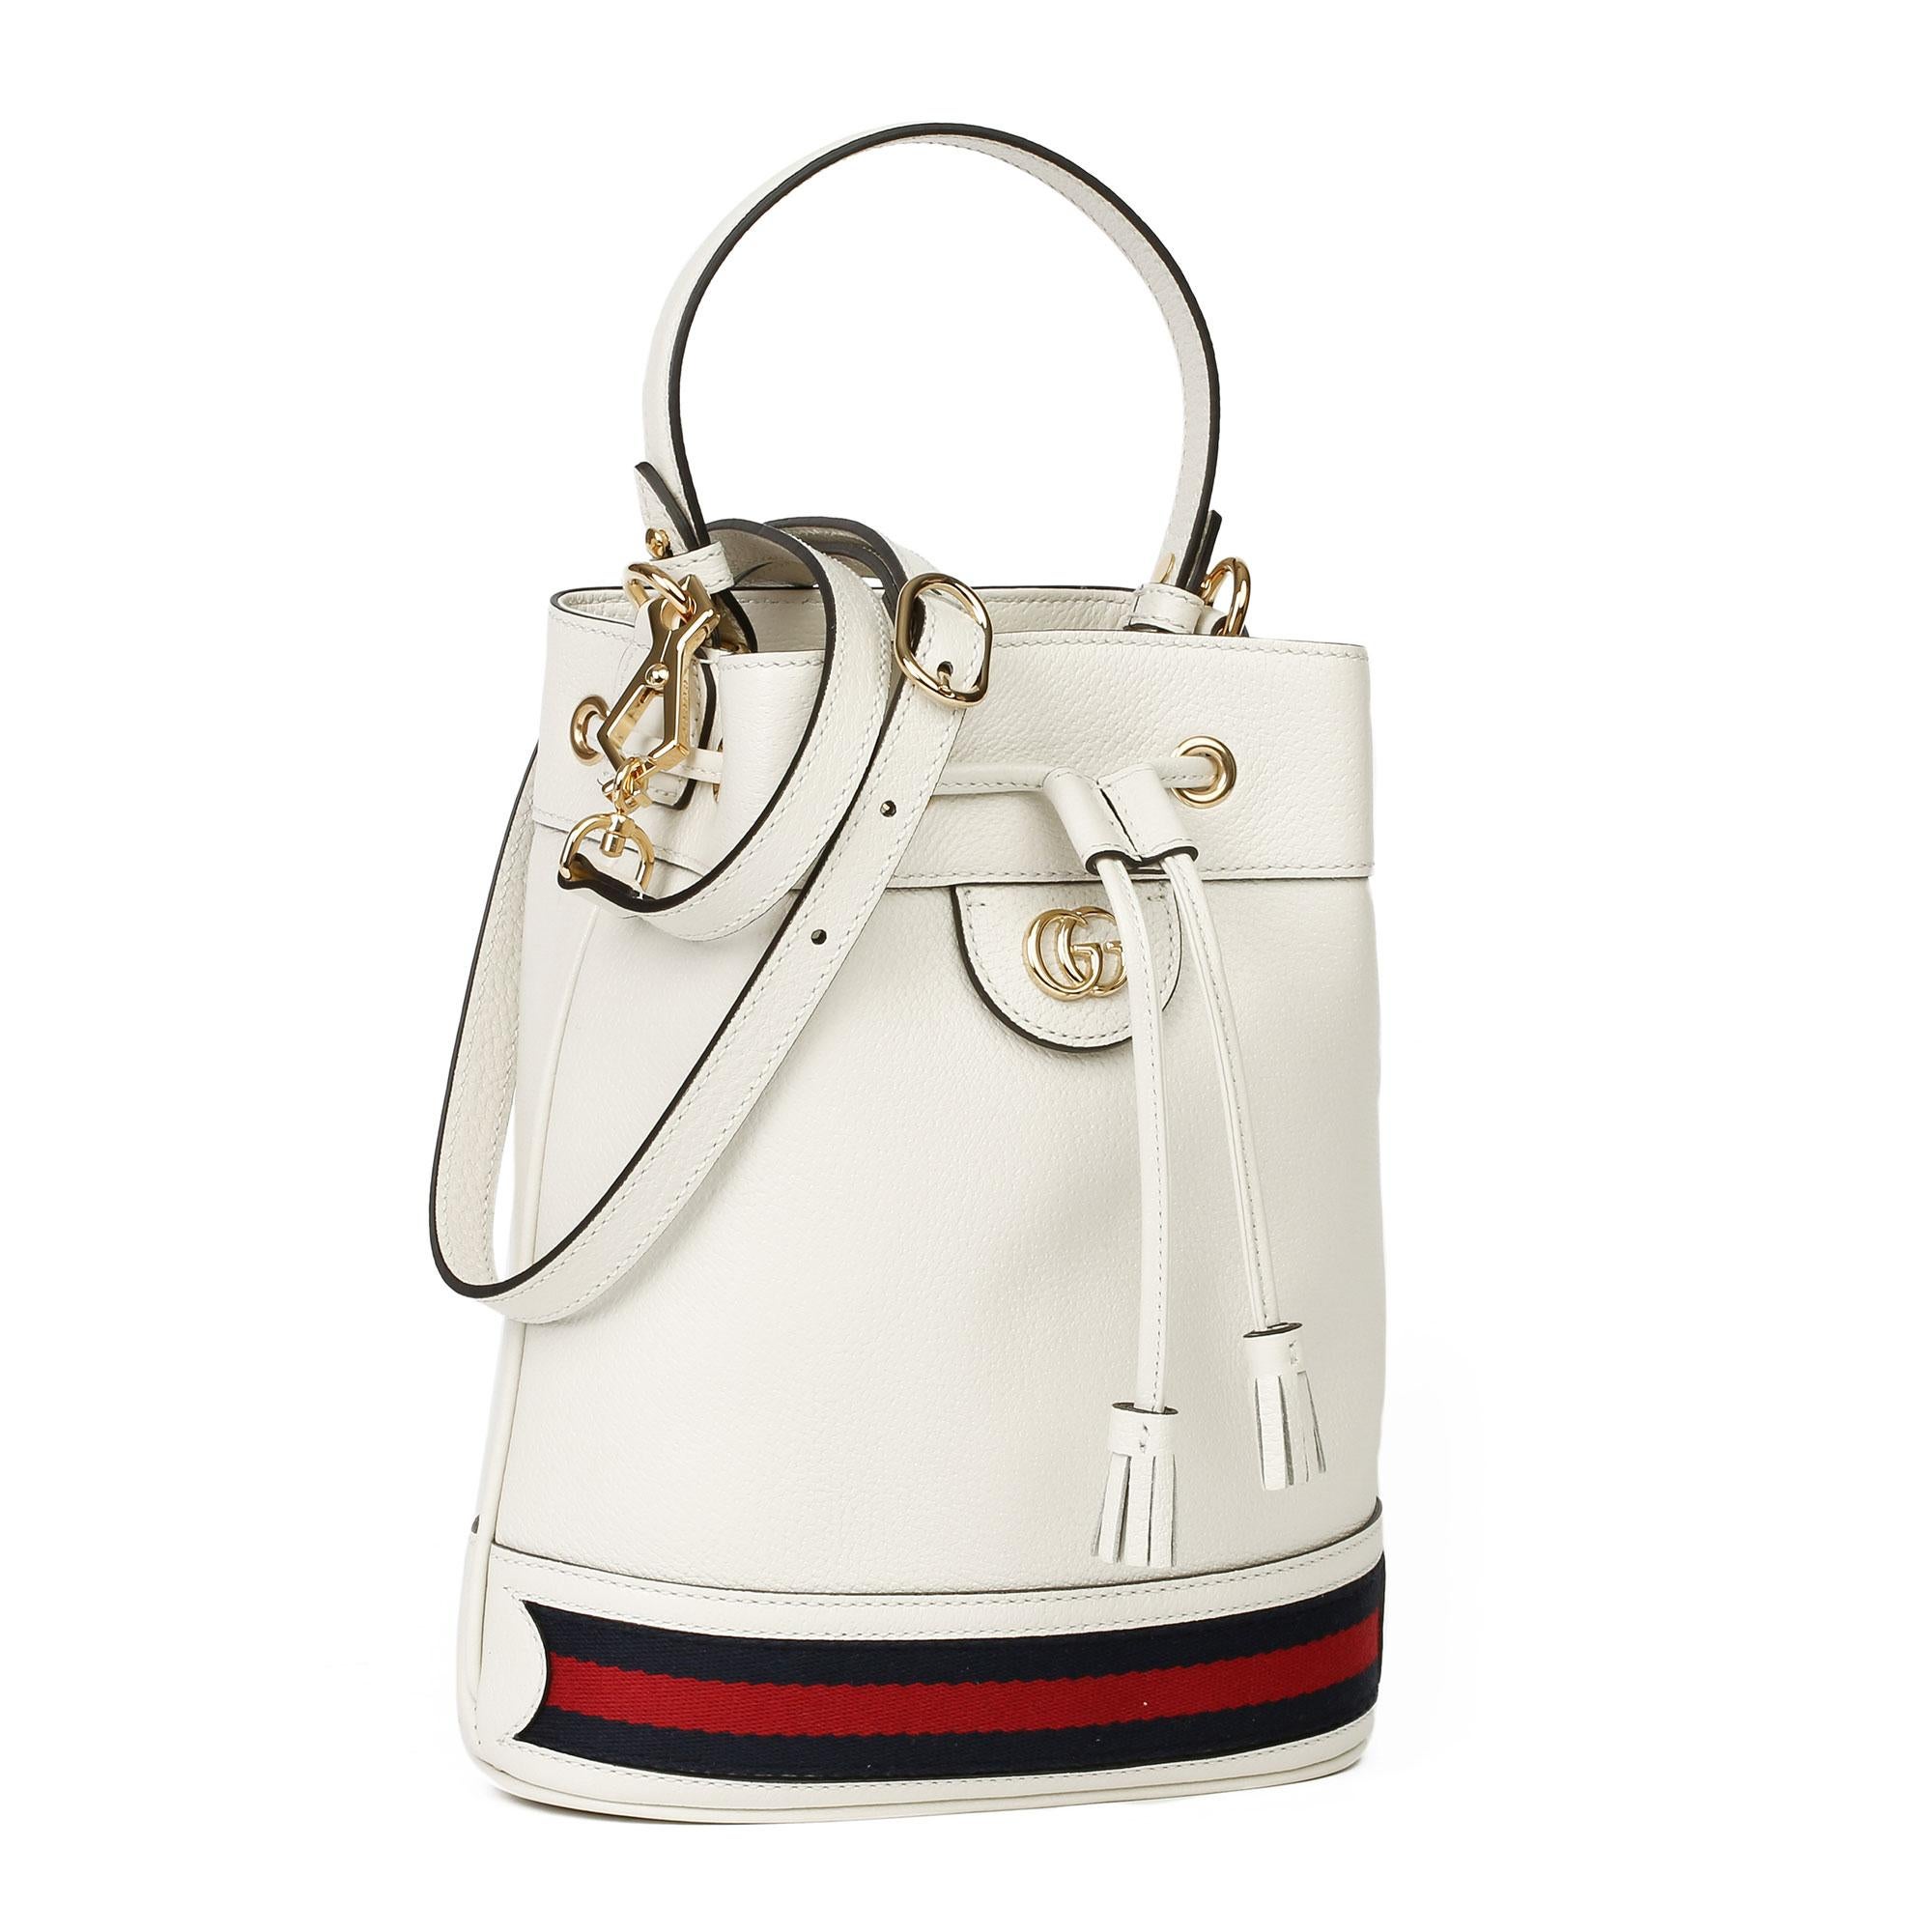 GUCCI
White Pigskin Leather Web Orphidia Bucket Bag

Xupes Reference: CB307
Serial Number: 610846 498875
Age (Circa): 2021
Accompanied By: Gucci Dust Bag, Care Booklet, Shoulder Strap
Authenticity Details: Serial Stamp (Made in Italy)
Gender: